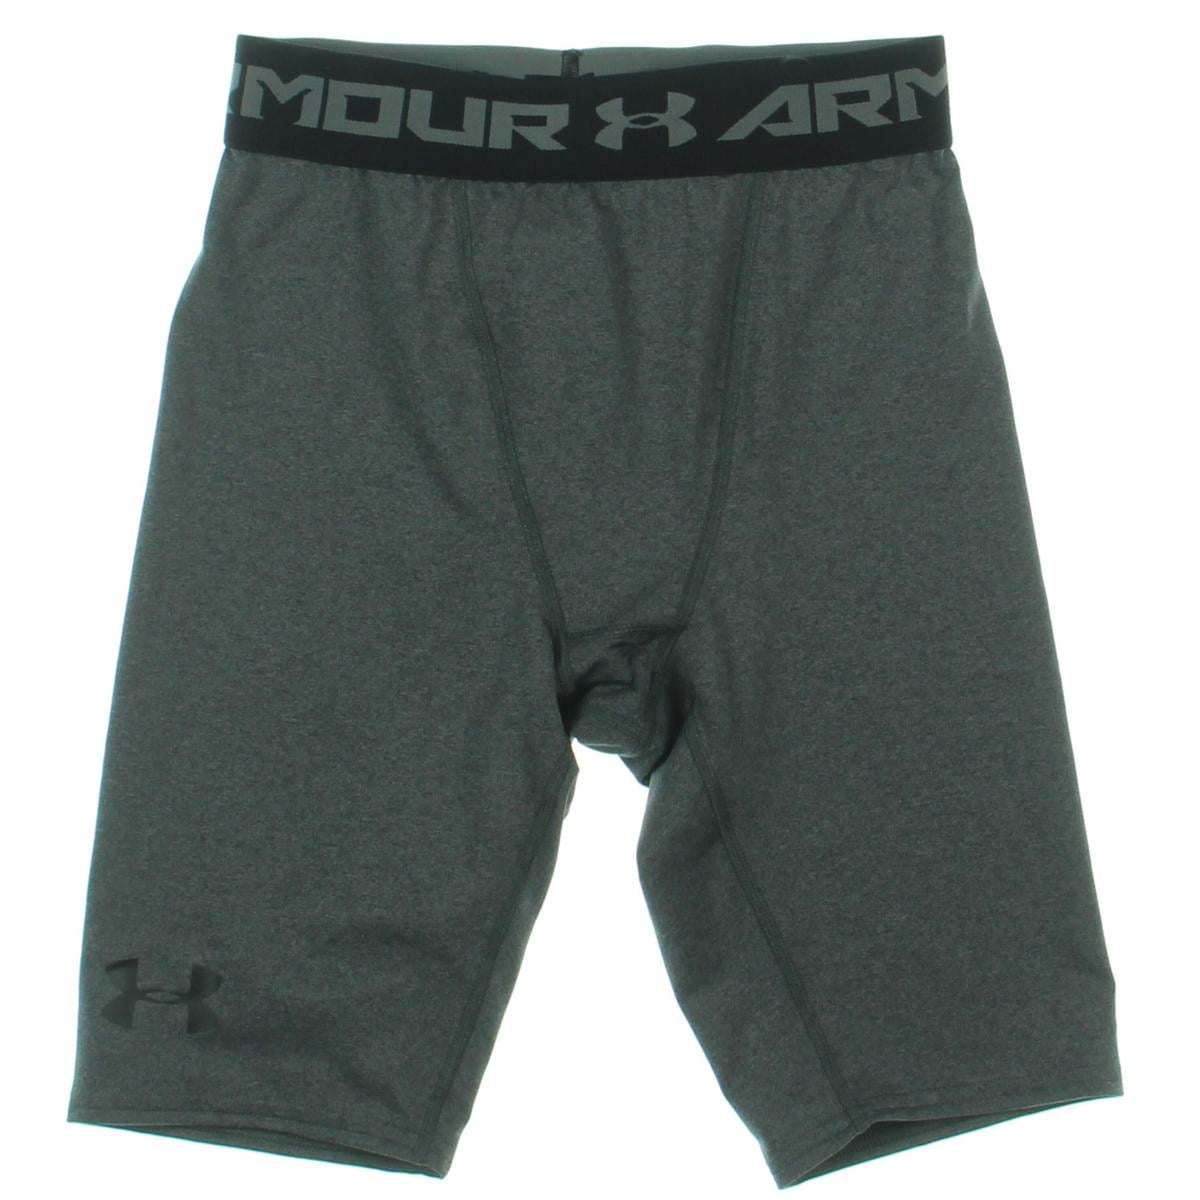 under armour compression boxers